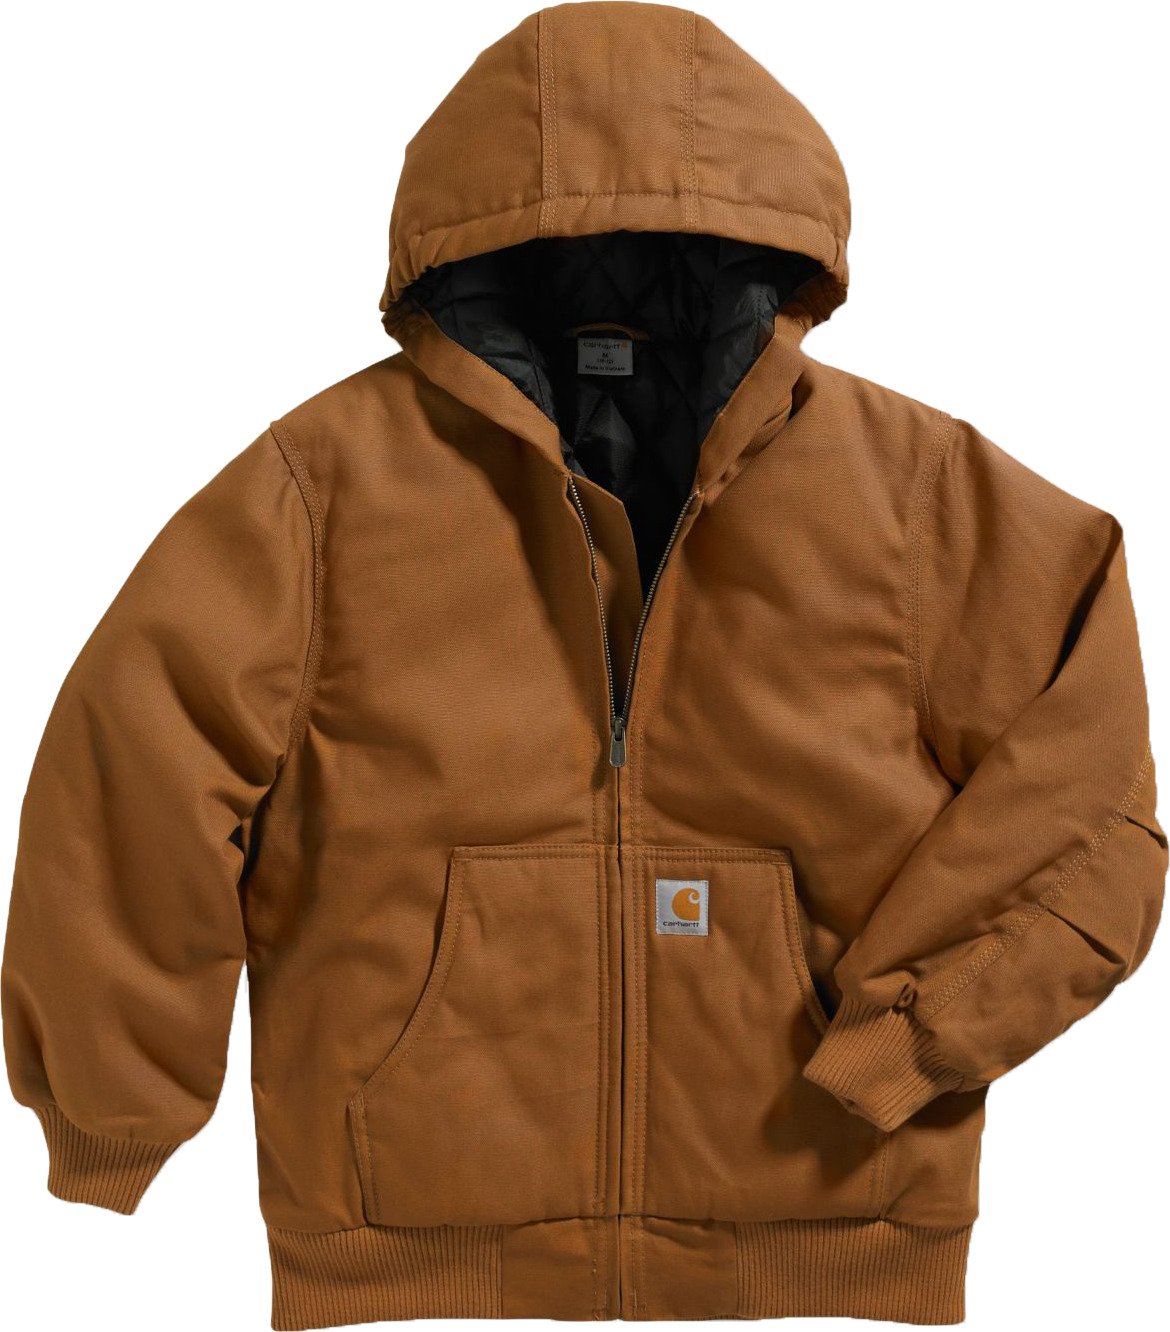 Carhartt Girls' Work Active Jacket | Free Shipping at Academy